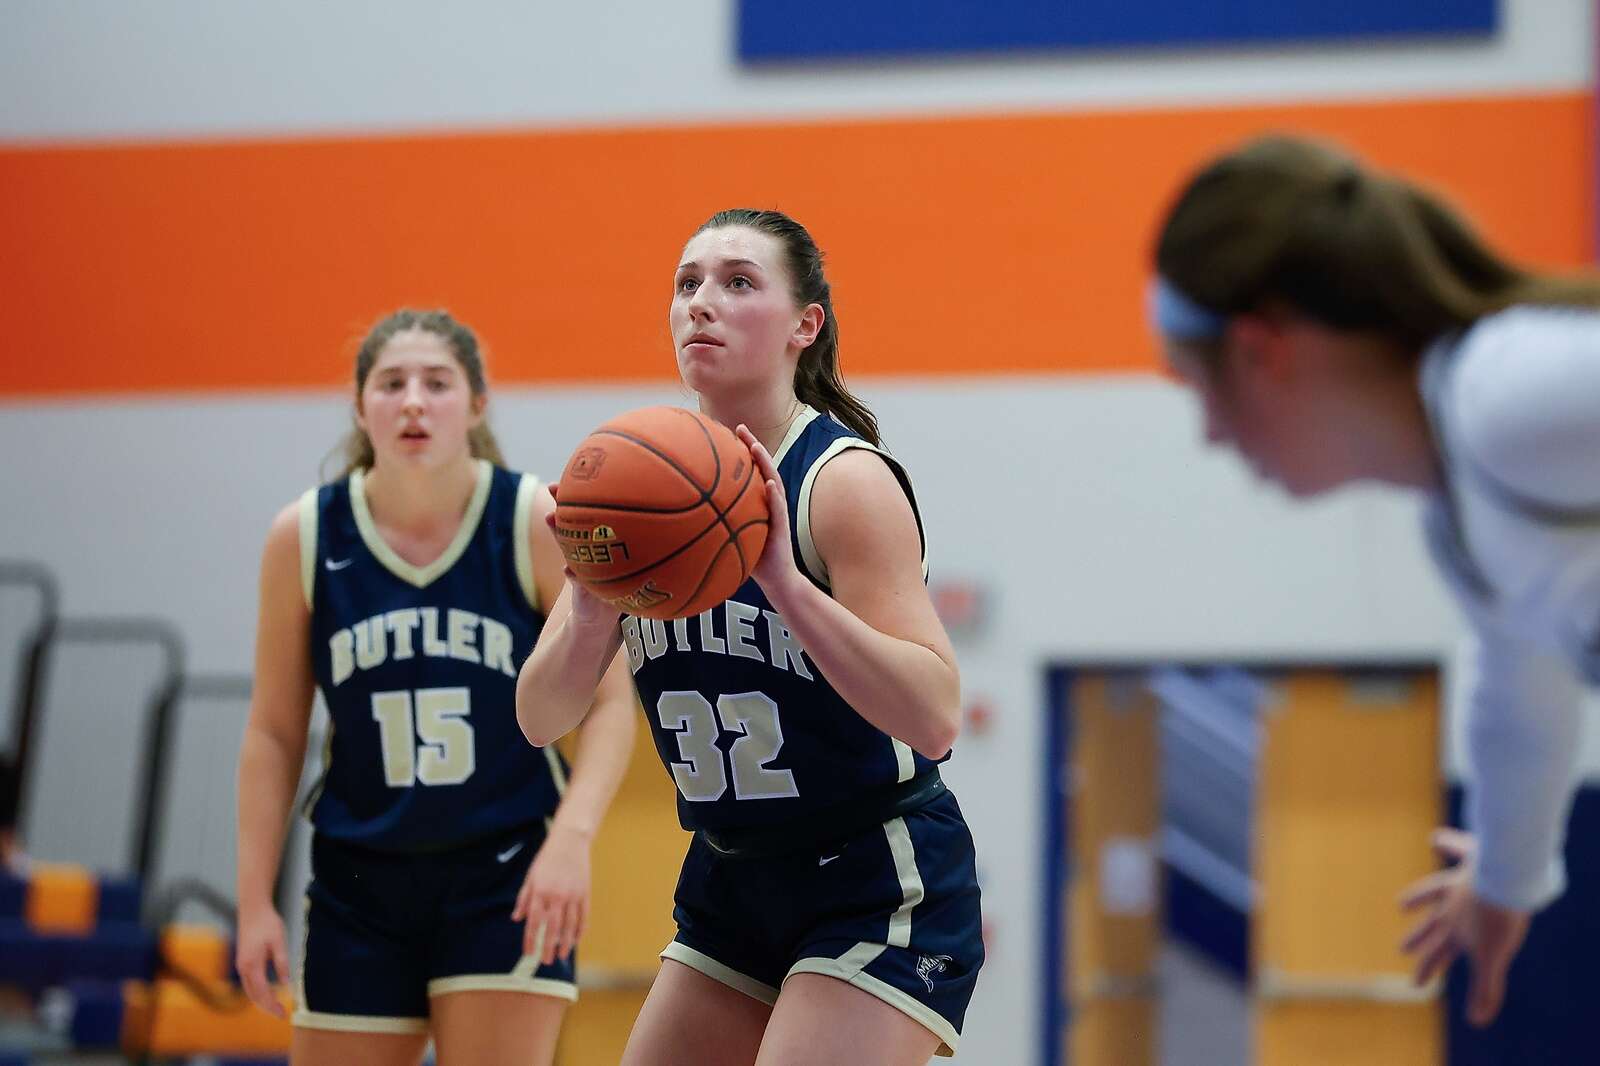 Butler’s Amelia McMichael sets for a free throw